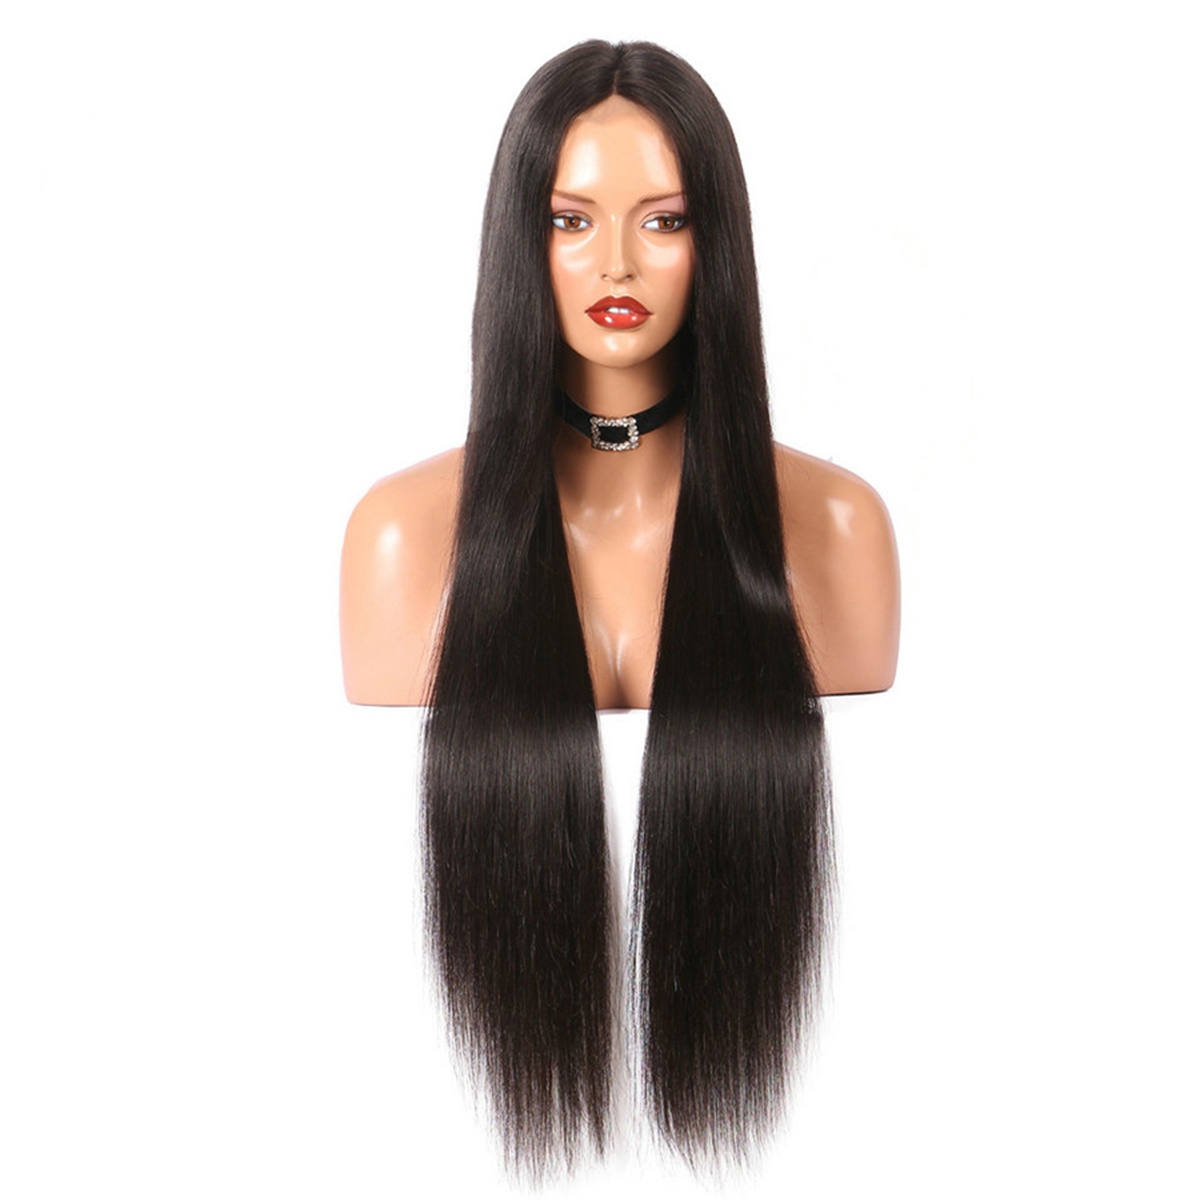 Silky Straight Lace Front Human Hair Wigs For Black Women Glueless Brazilian Virgin Human Hair Wigs With Baby Hair